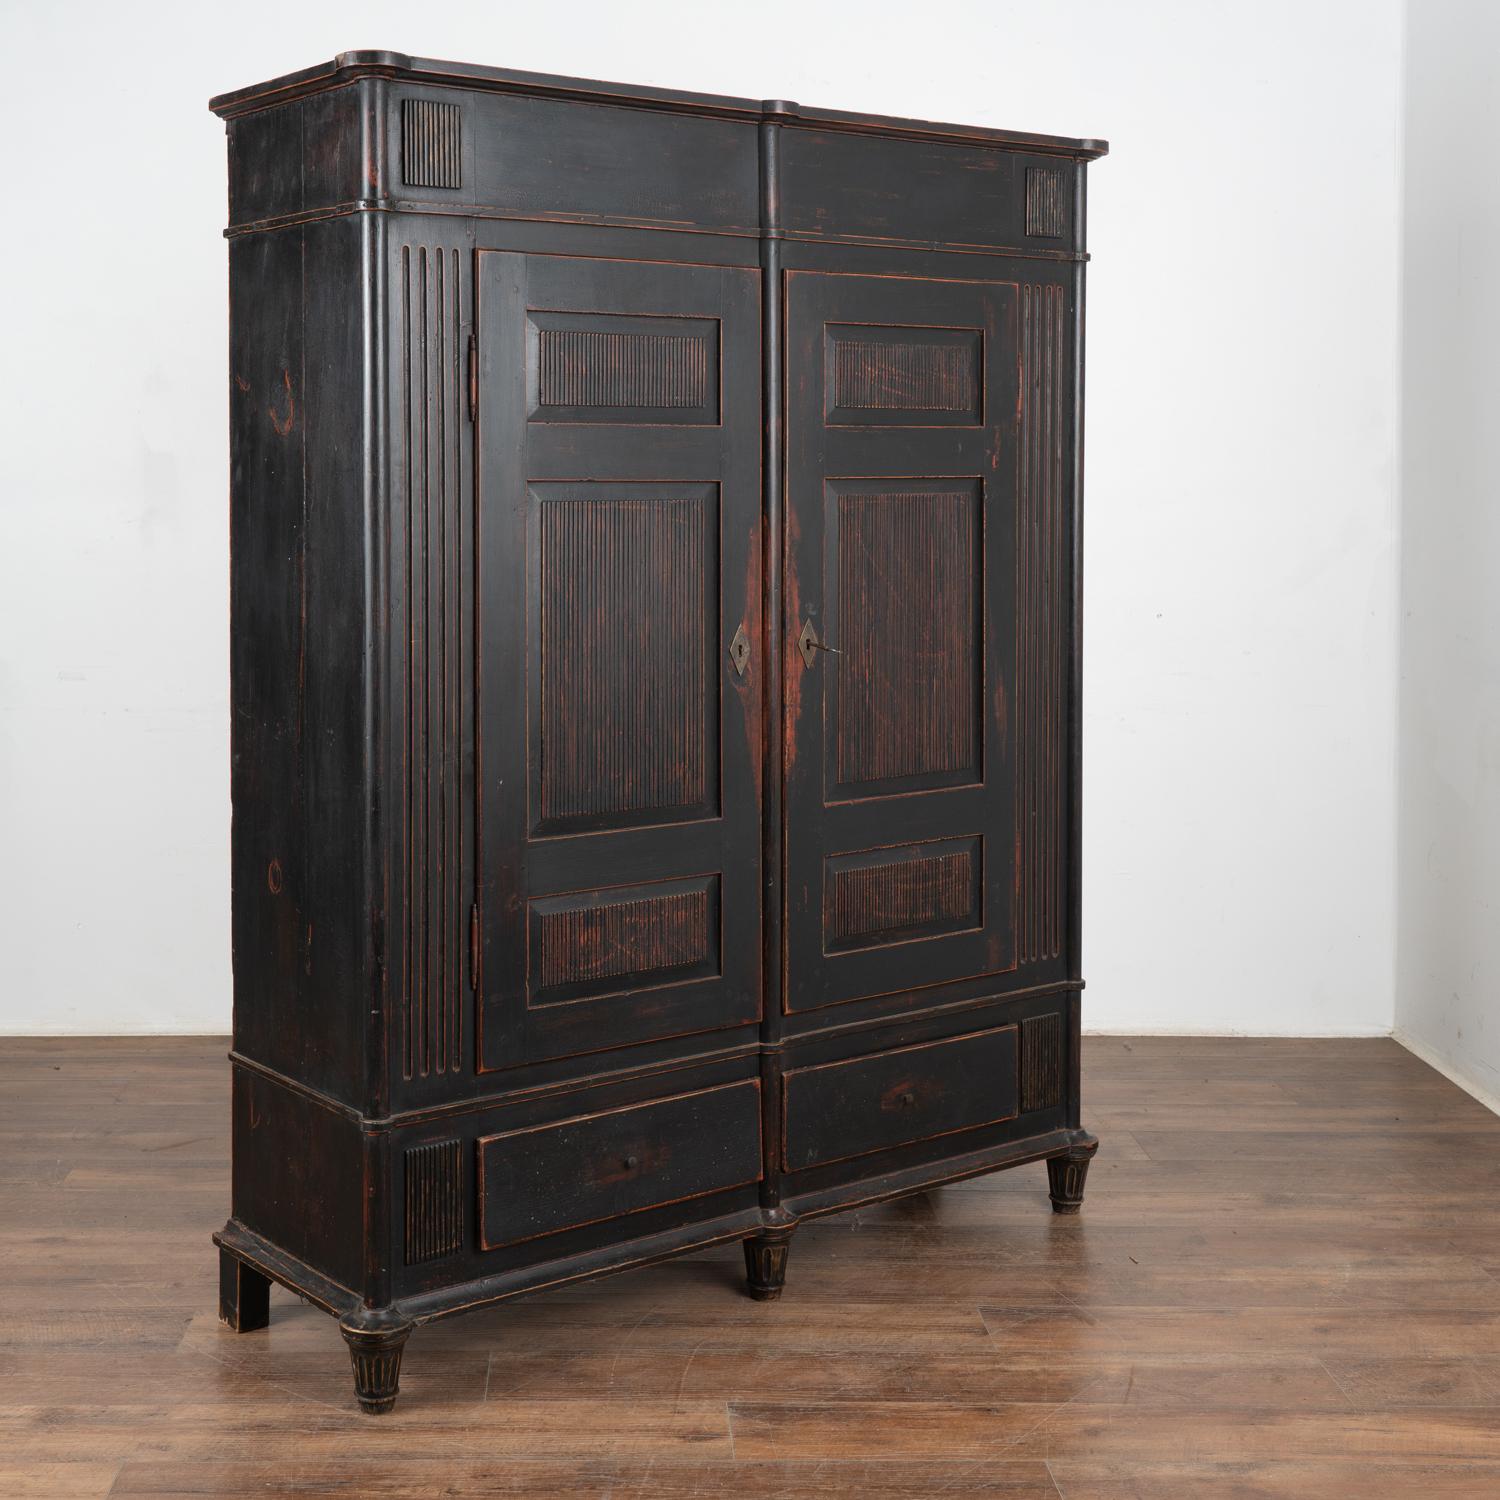 This 6' tall pine armoire has been given new life with a recent black painted finish. The finish is lightly distressed to accent the details of the fluted carving along doors and sides, adding dimension and character.
There are two lower drawers and